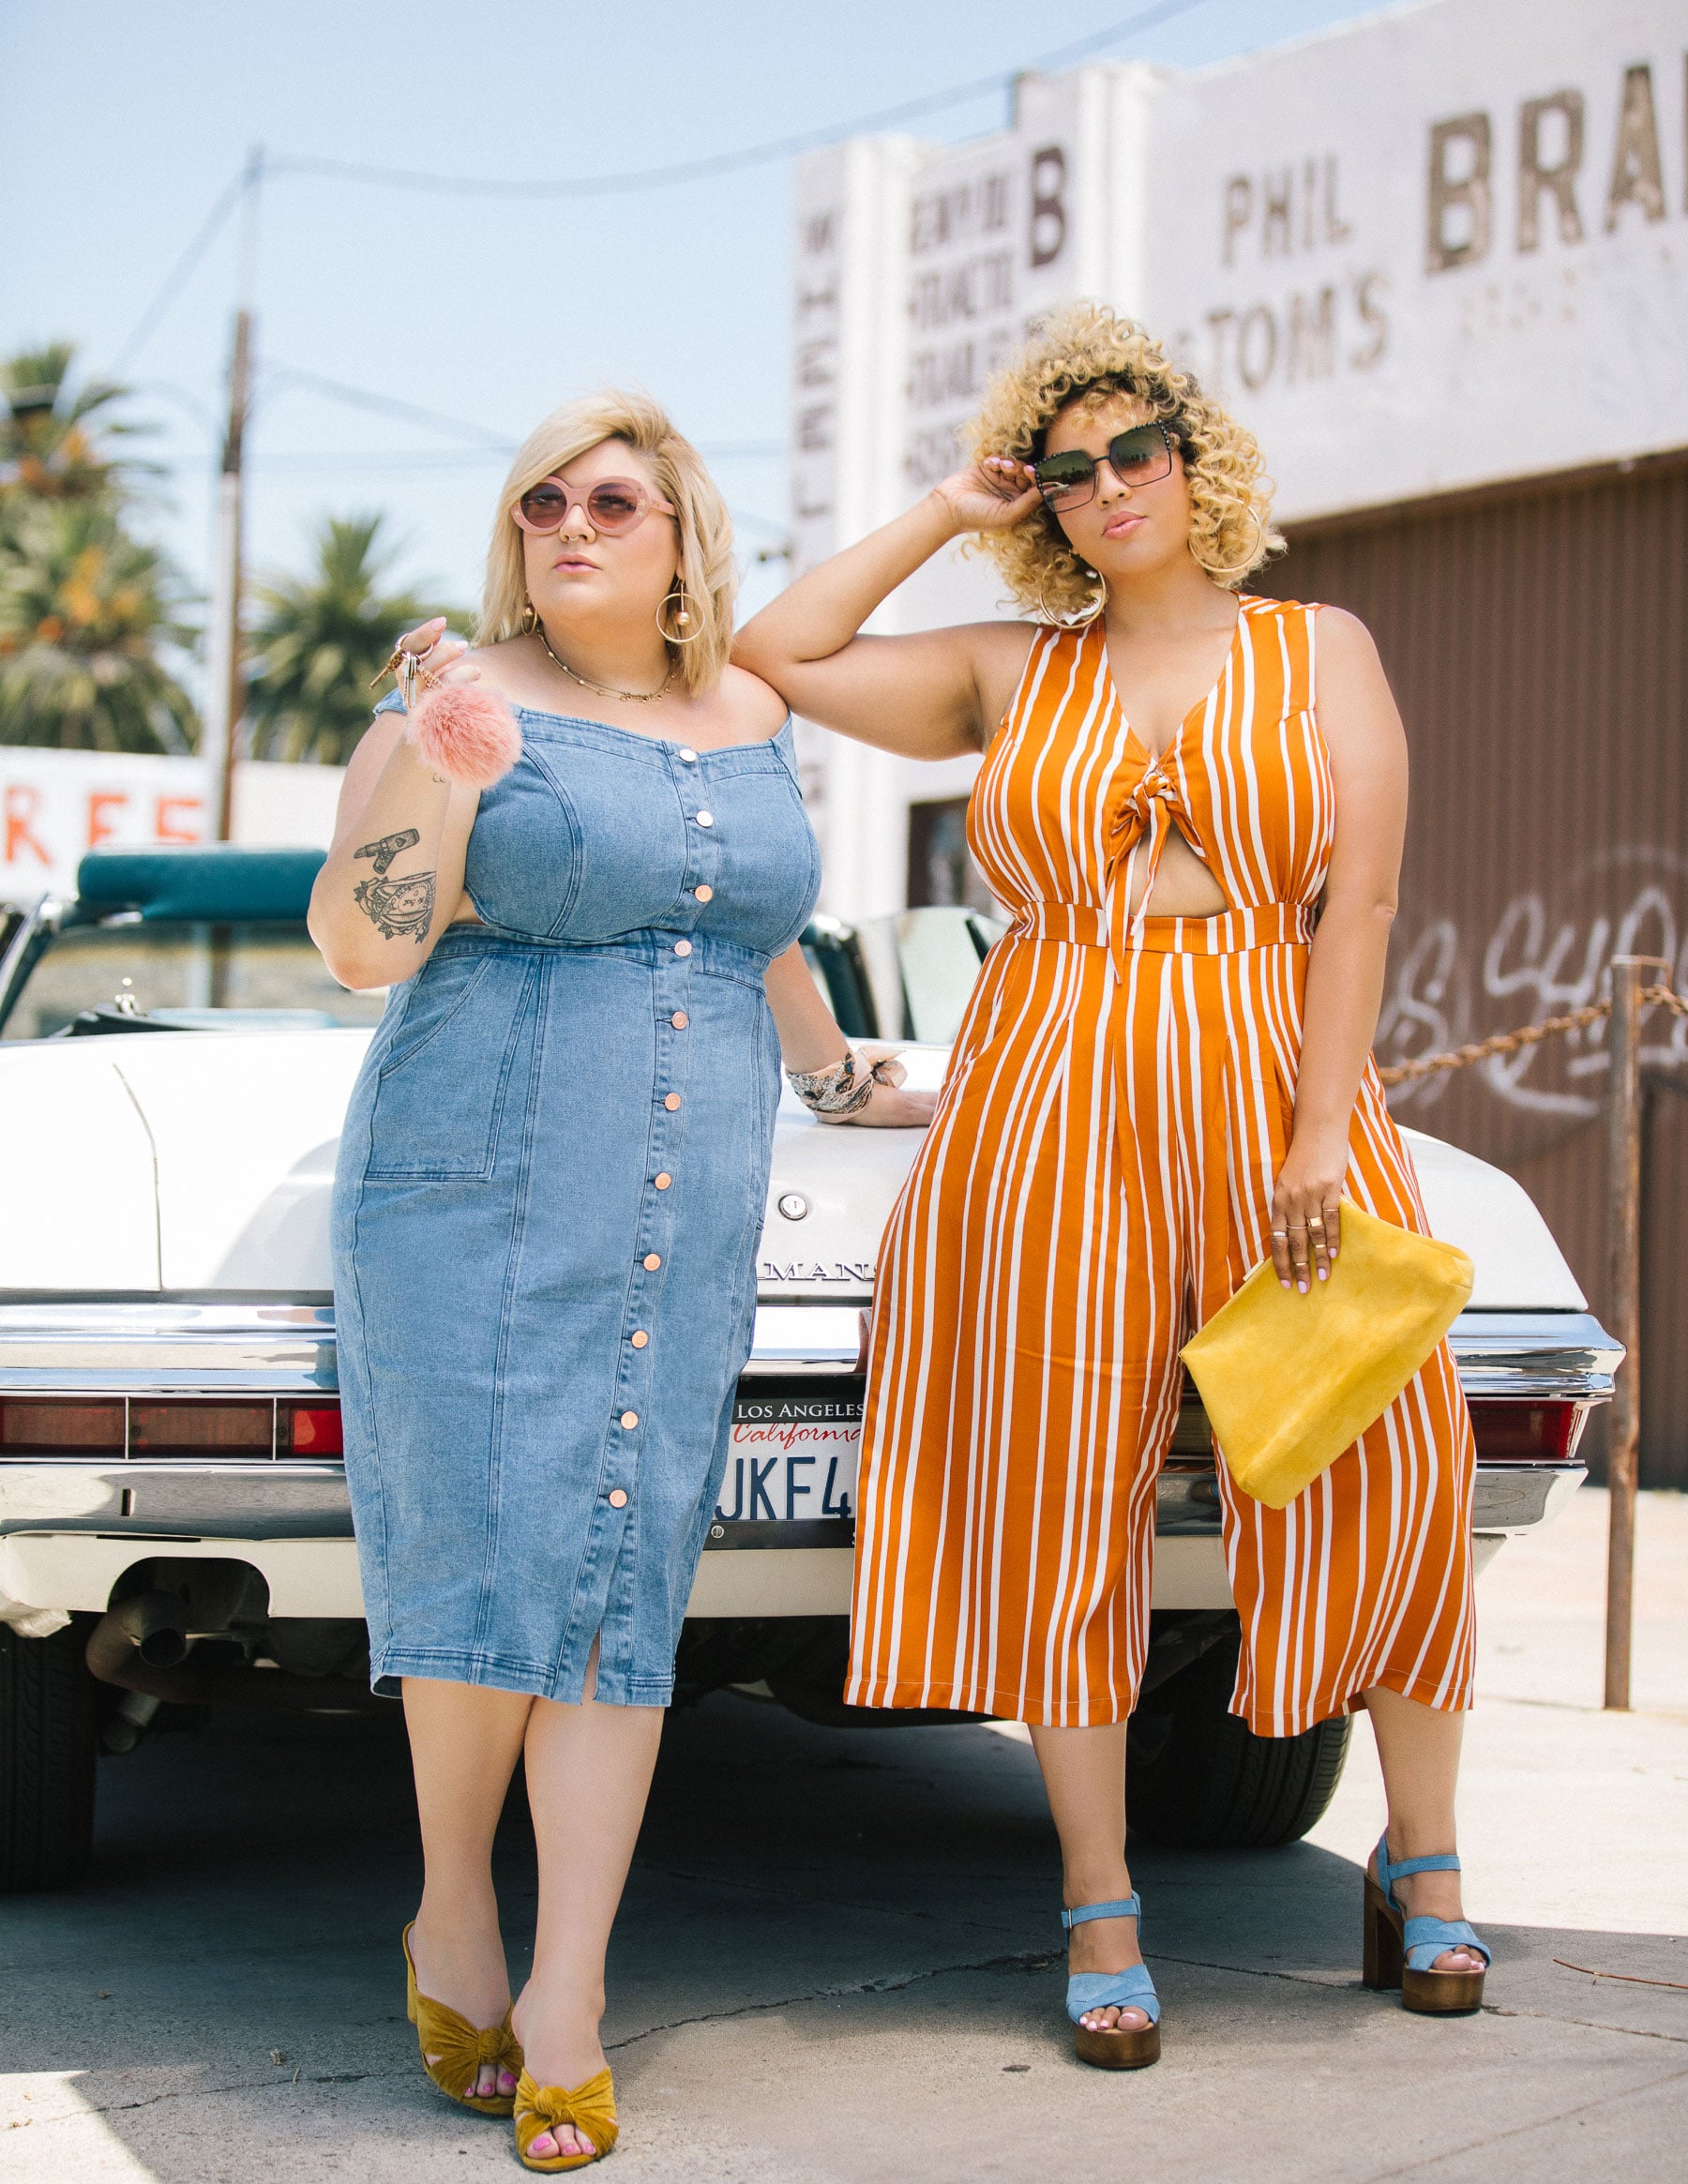 Fashion, Shopping Style | Our Favorite Plus-Size Bloggers Just Launched Their Own Clothing Line — and It's Freakin' Perfect | POPSUGAR Fashion Photo 5